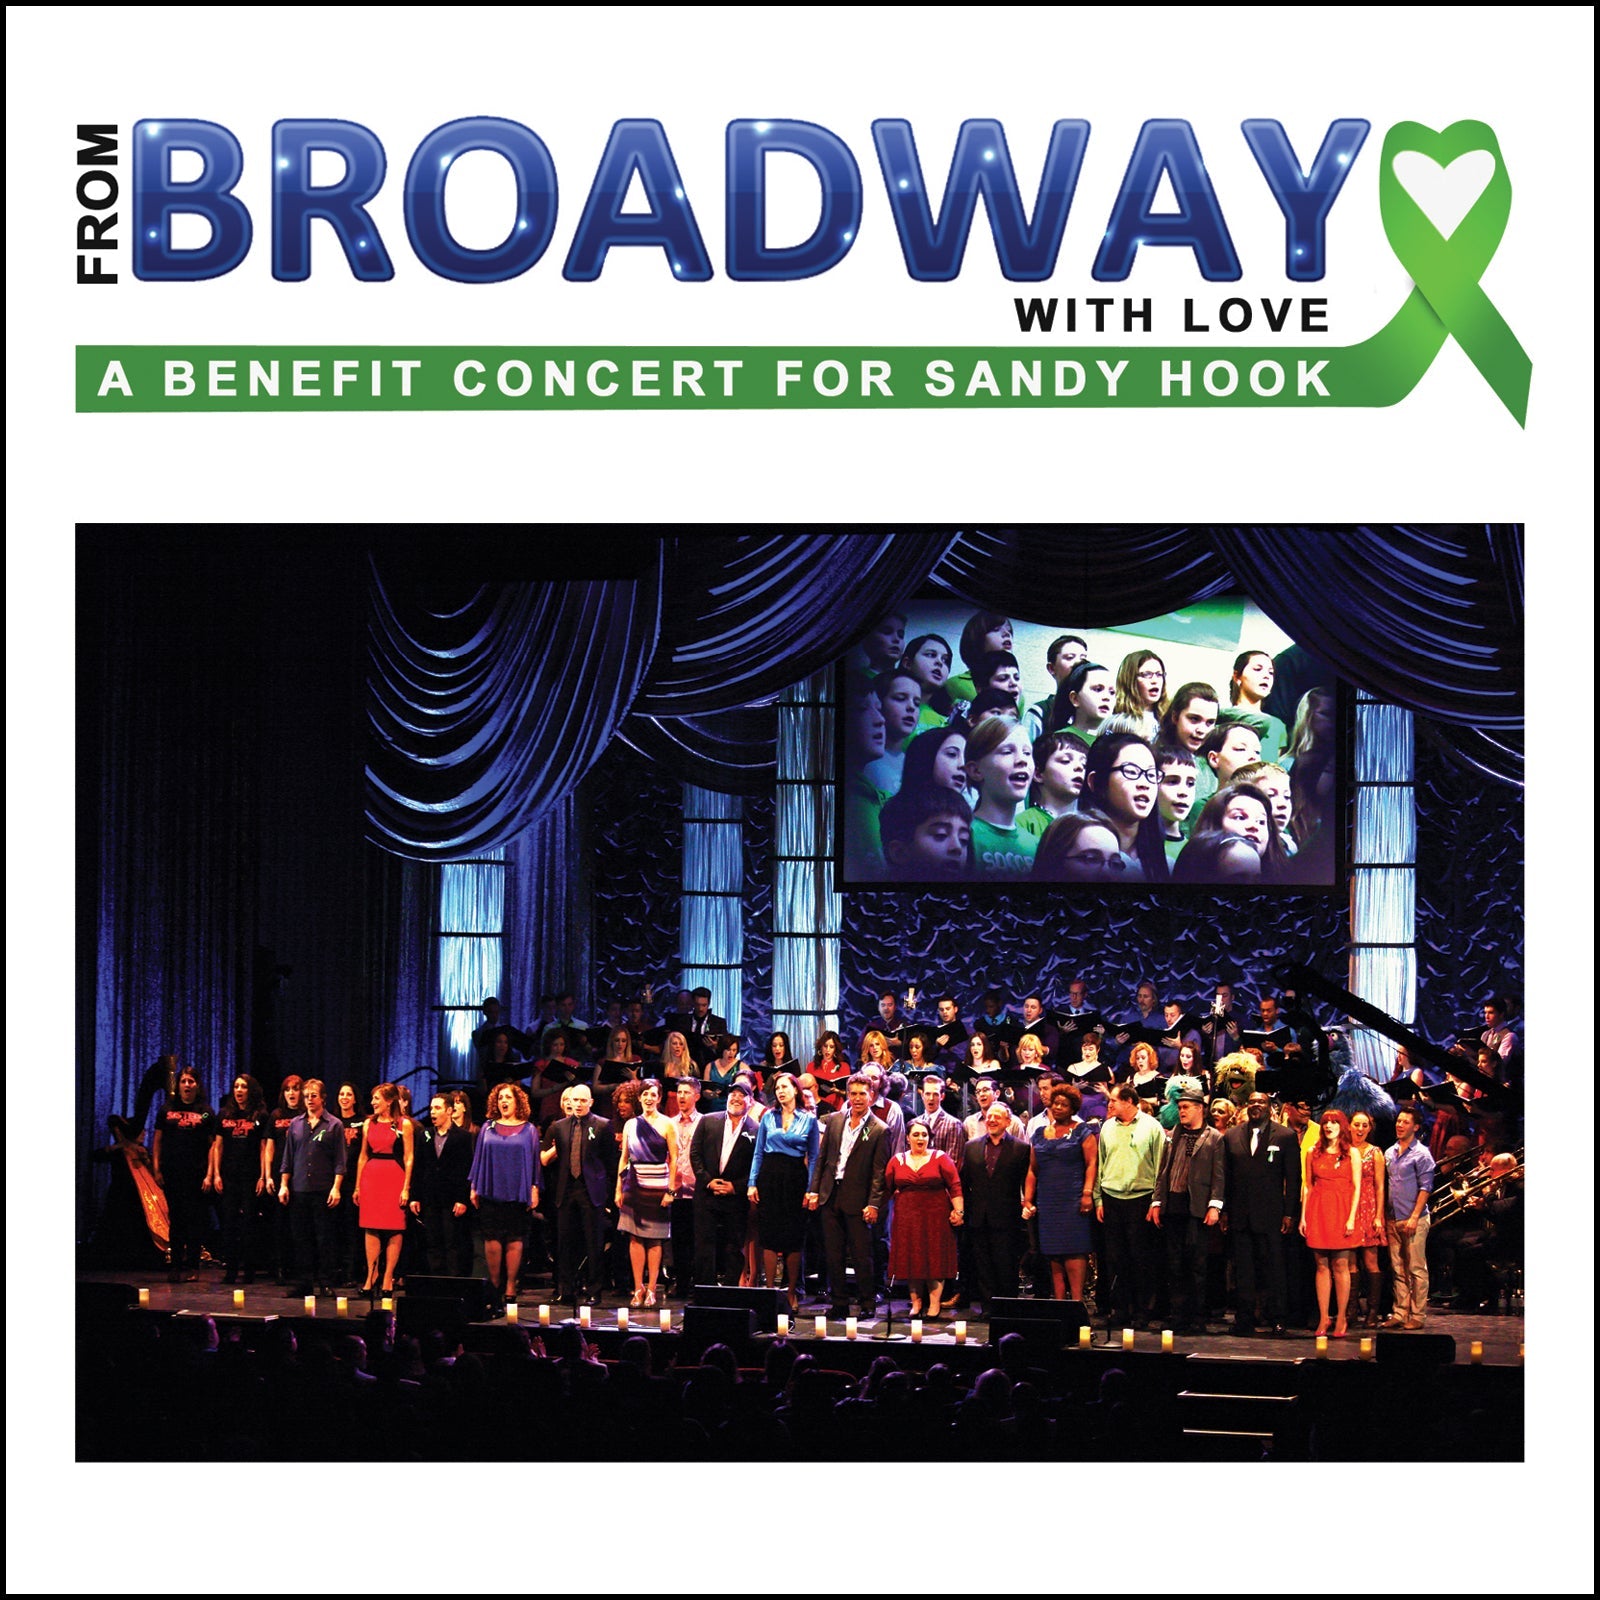 From Broadway With Love: A Benefit Concert For Sandy Hook [MP3]